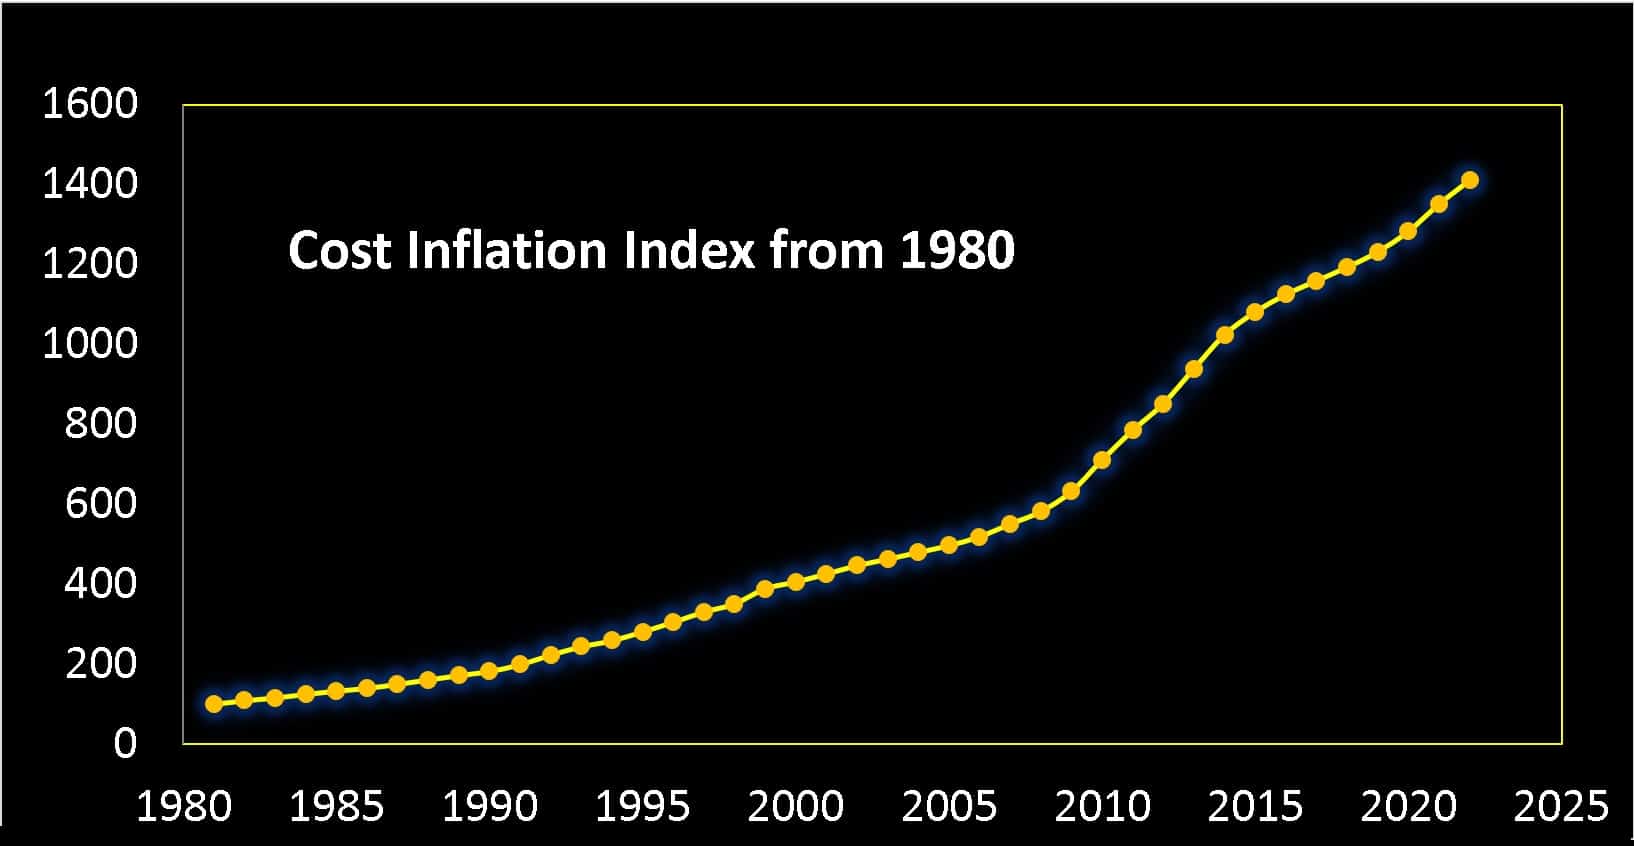 Cost Inflation Index from 1980 to 2022